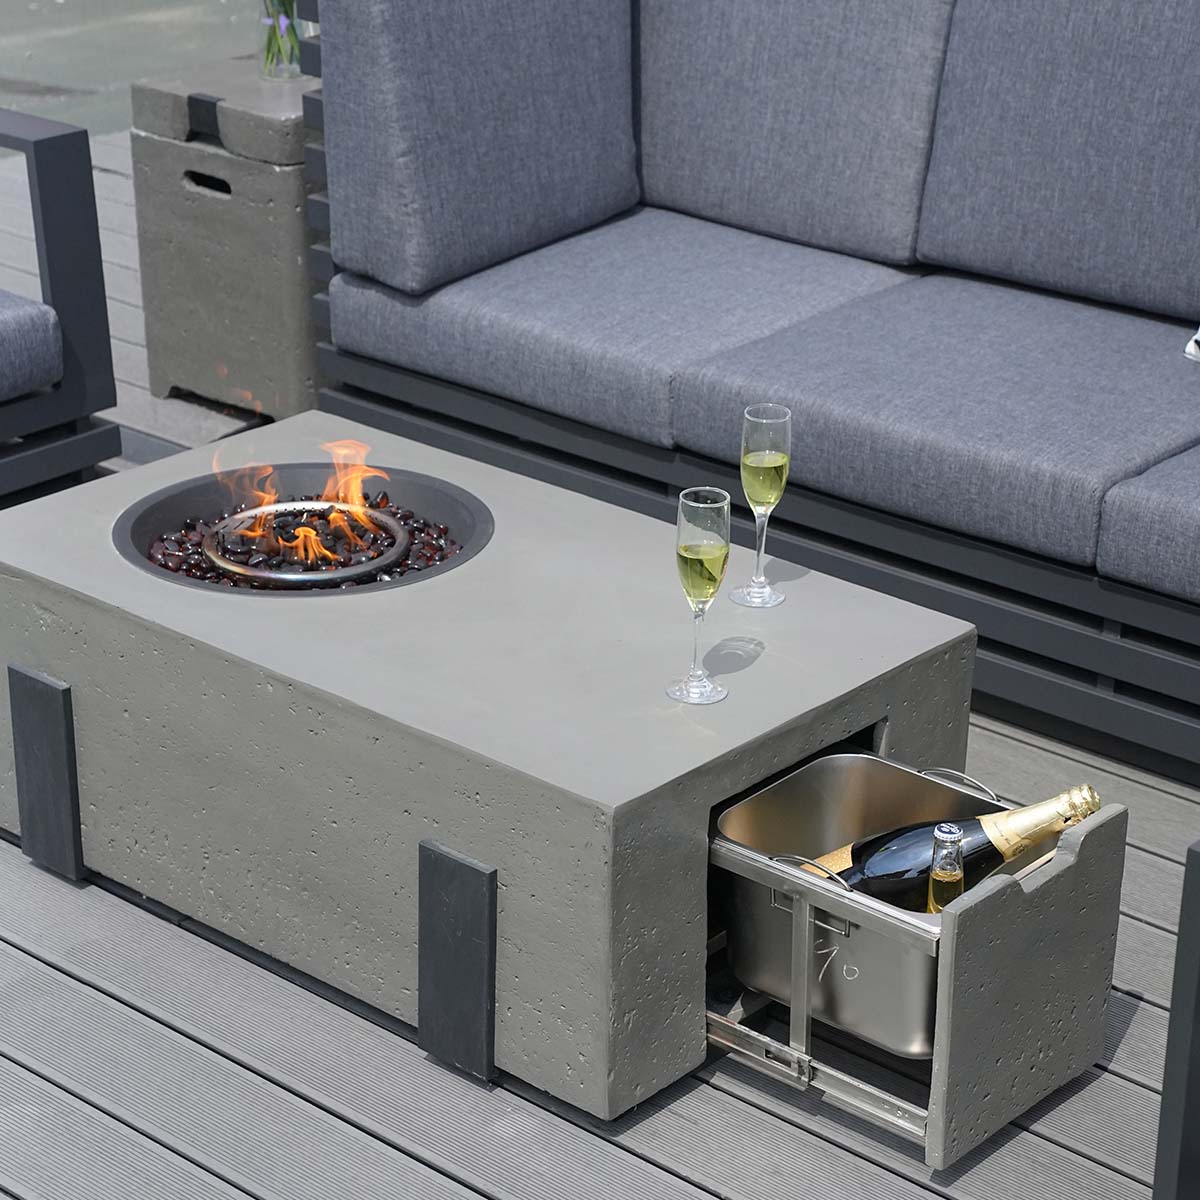 The latest furniture on the market - Abrihome 4-Pieces Patio Garden Aluminum Seating Set with Fire Pit